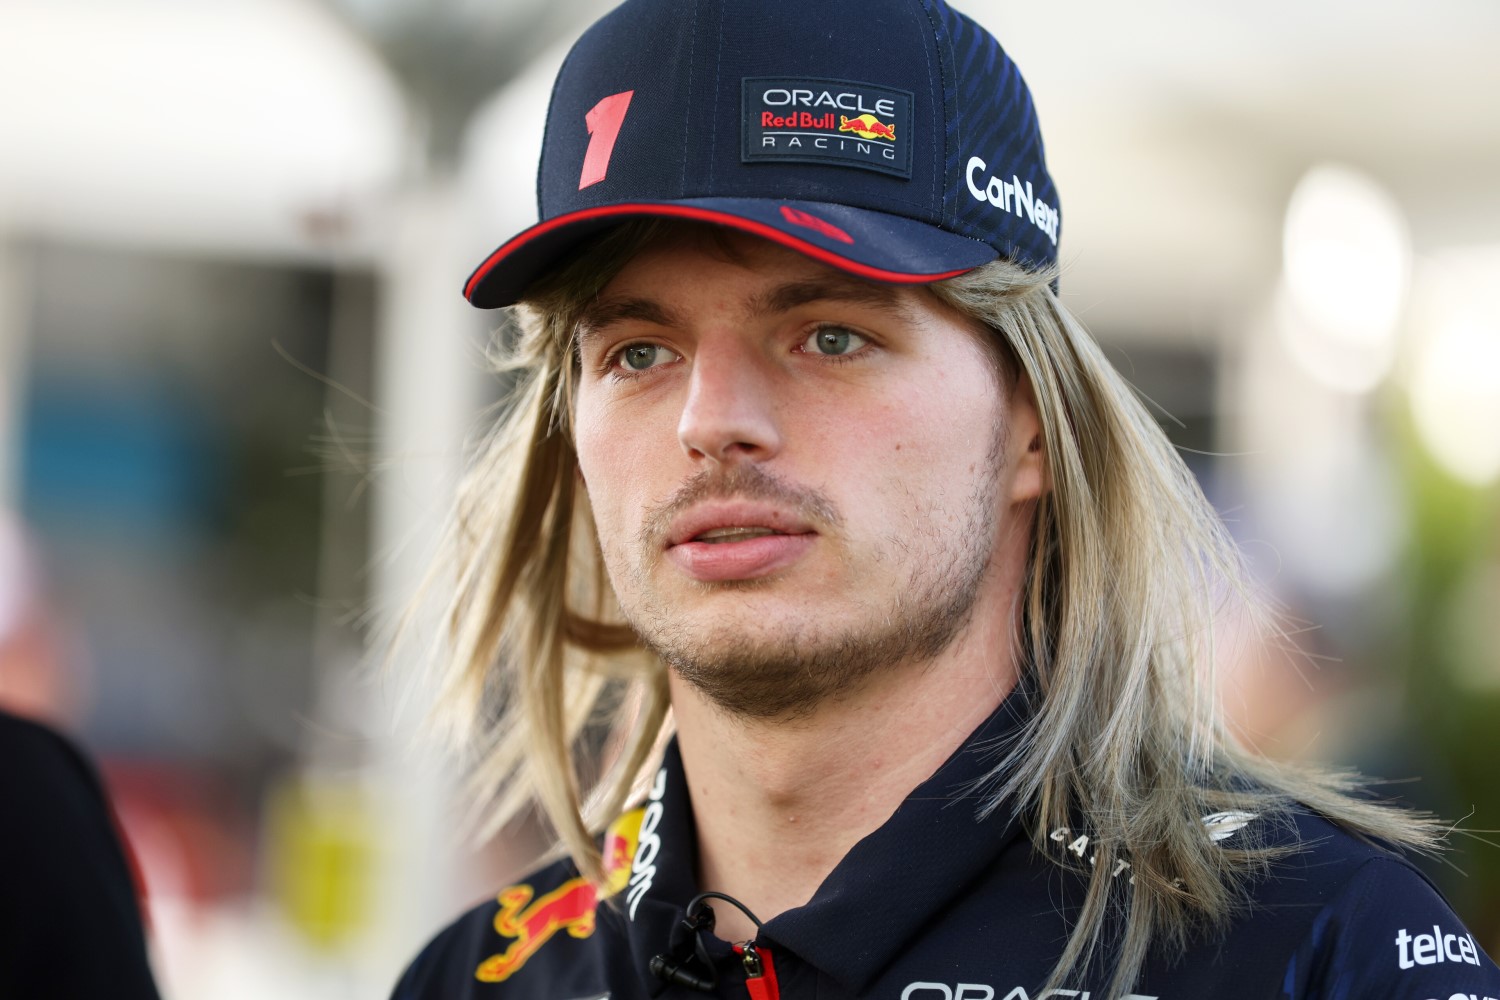 Trying out his rock star look - Max Verstappen of the Netherlands and Oracle Red Bull Racing wears a blonde wig in the Paddock during previews ahead of the F1 Grand Prix of Australia at Albert Park Grand Prix Circuit on March 30, 2023 in Melbourne, Australia. (Photo by Robert Cianflone/Getty Images) // Getty Images / Red Bull Content Pool